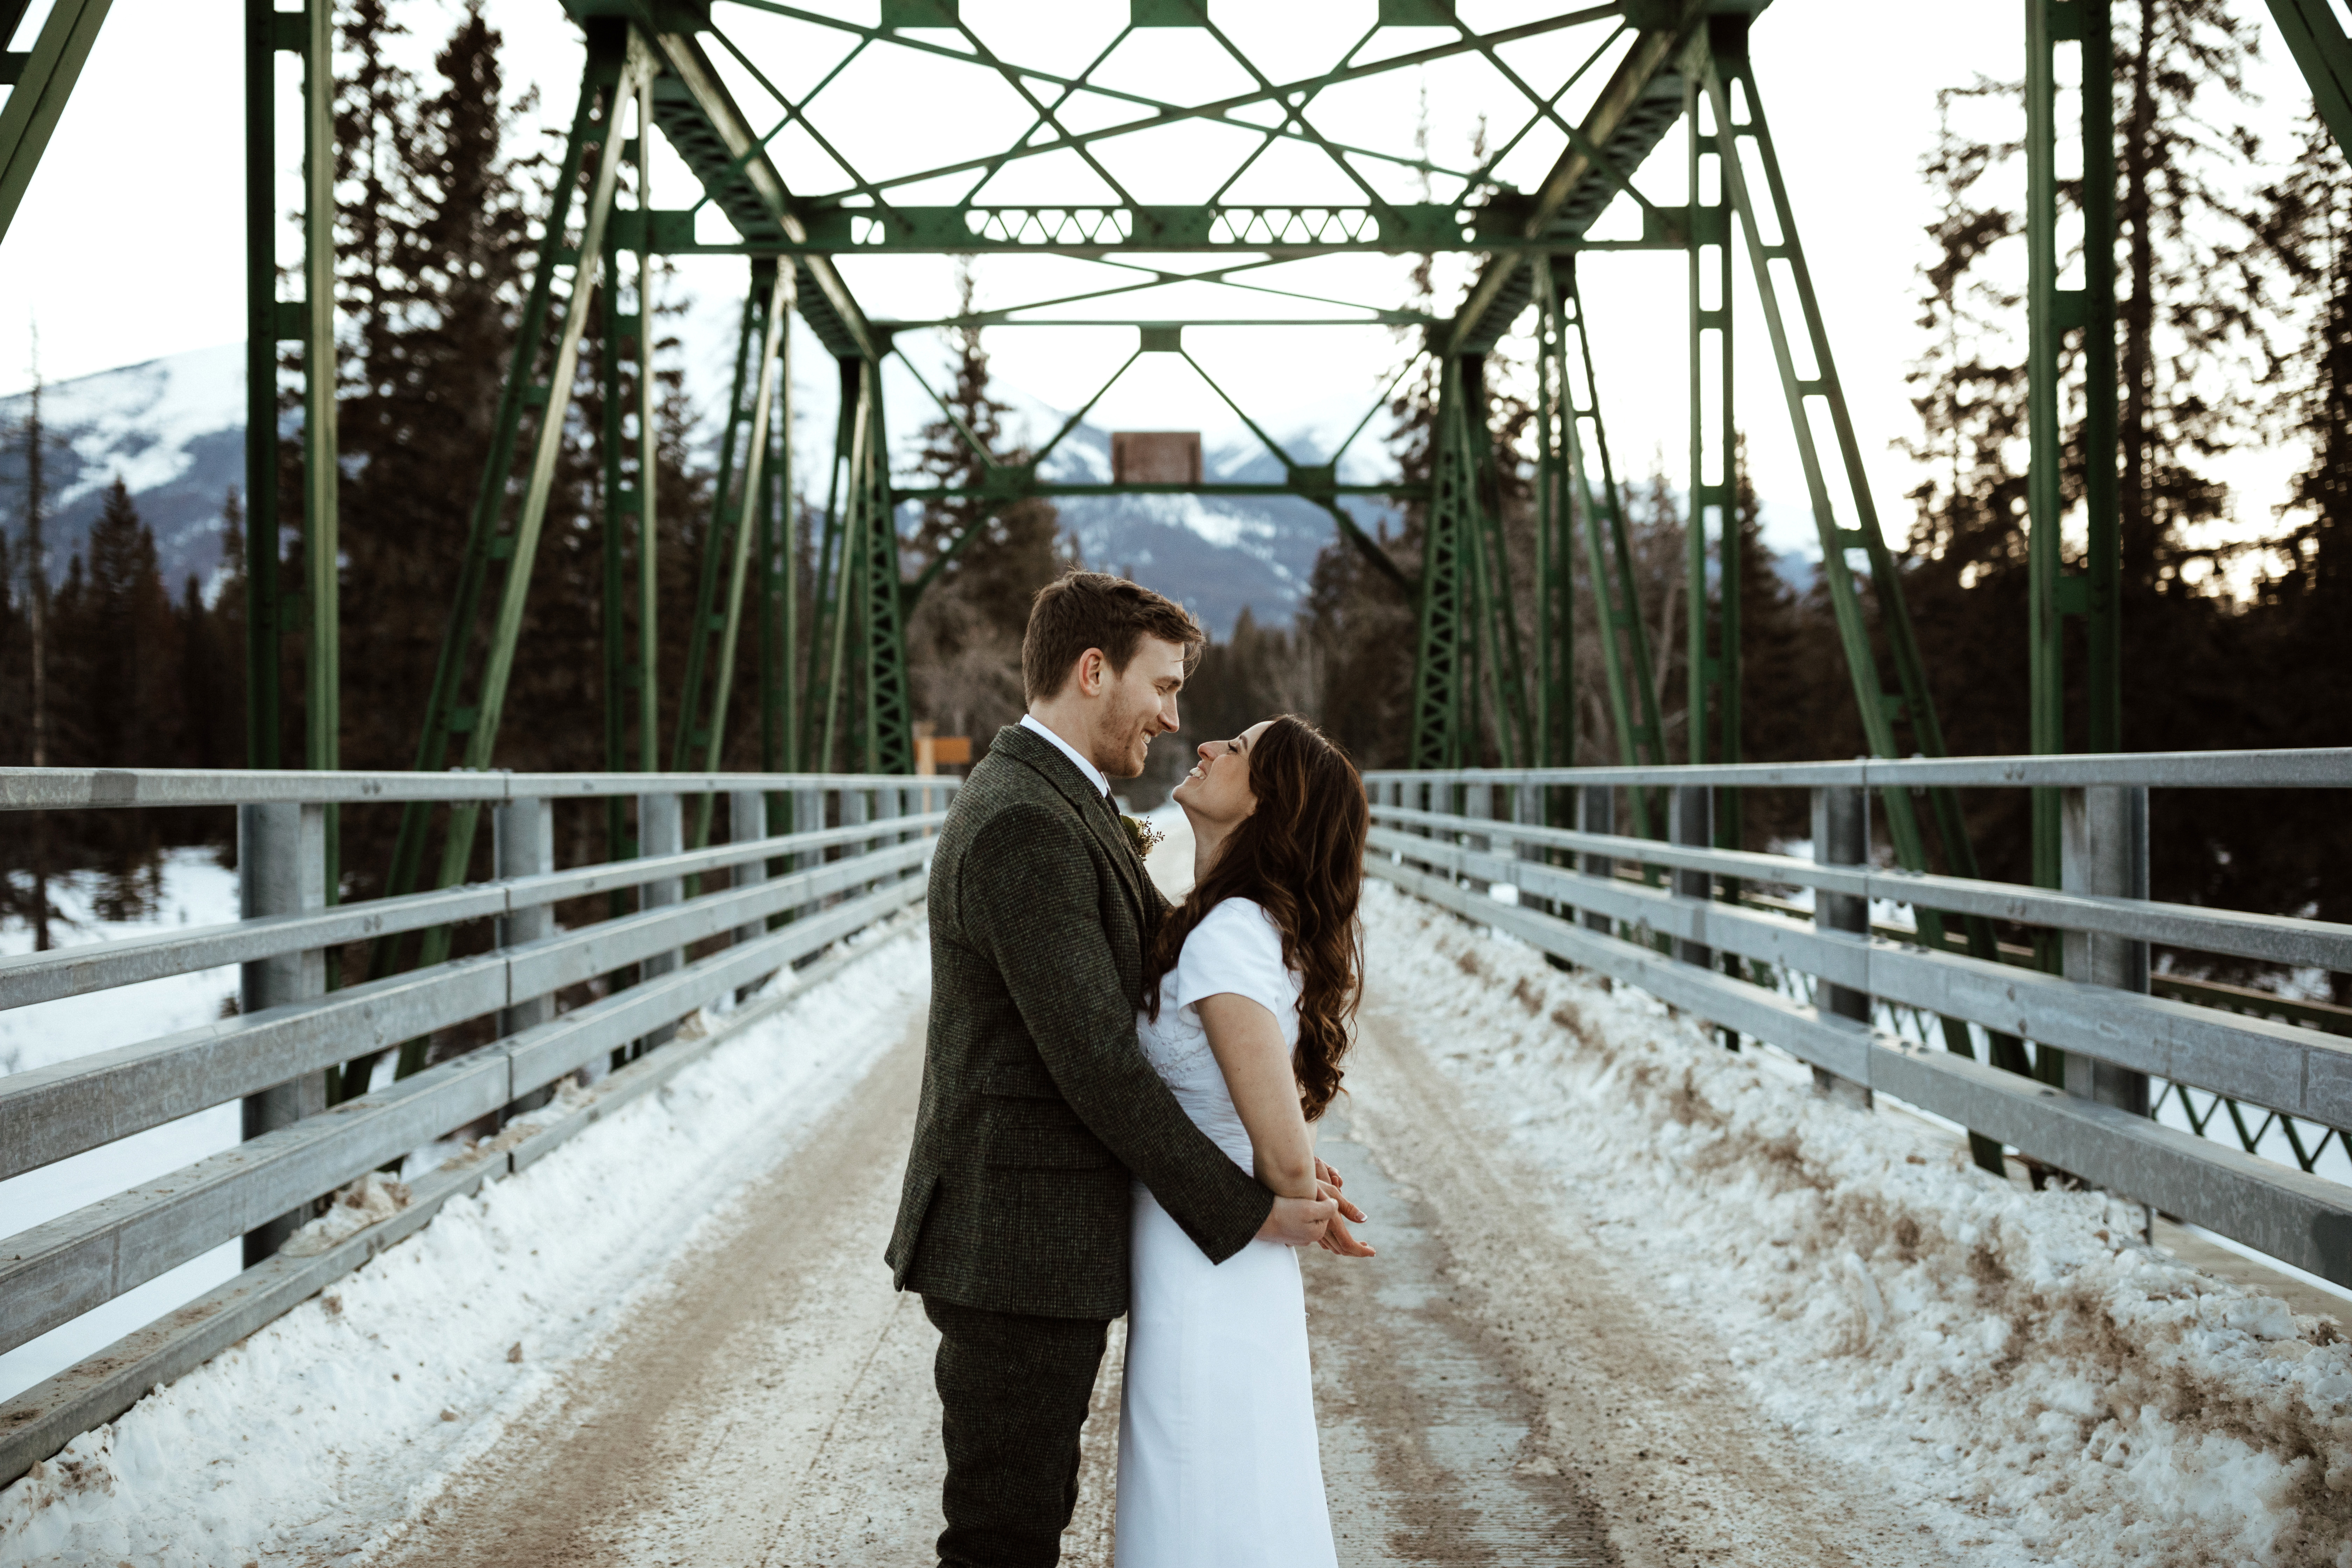 outdoorsy and adventurous young couple Elope in the Mountains of Jasper National Park Alberta in the Winter